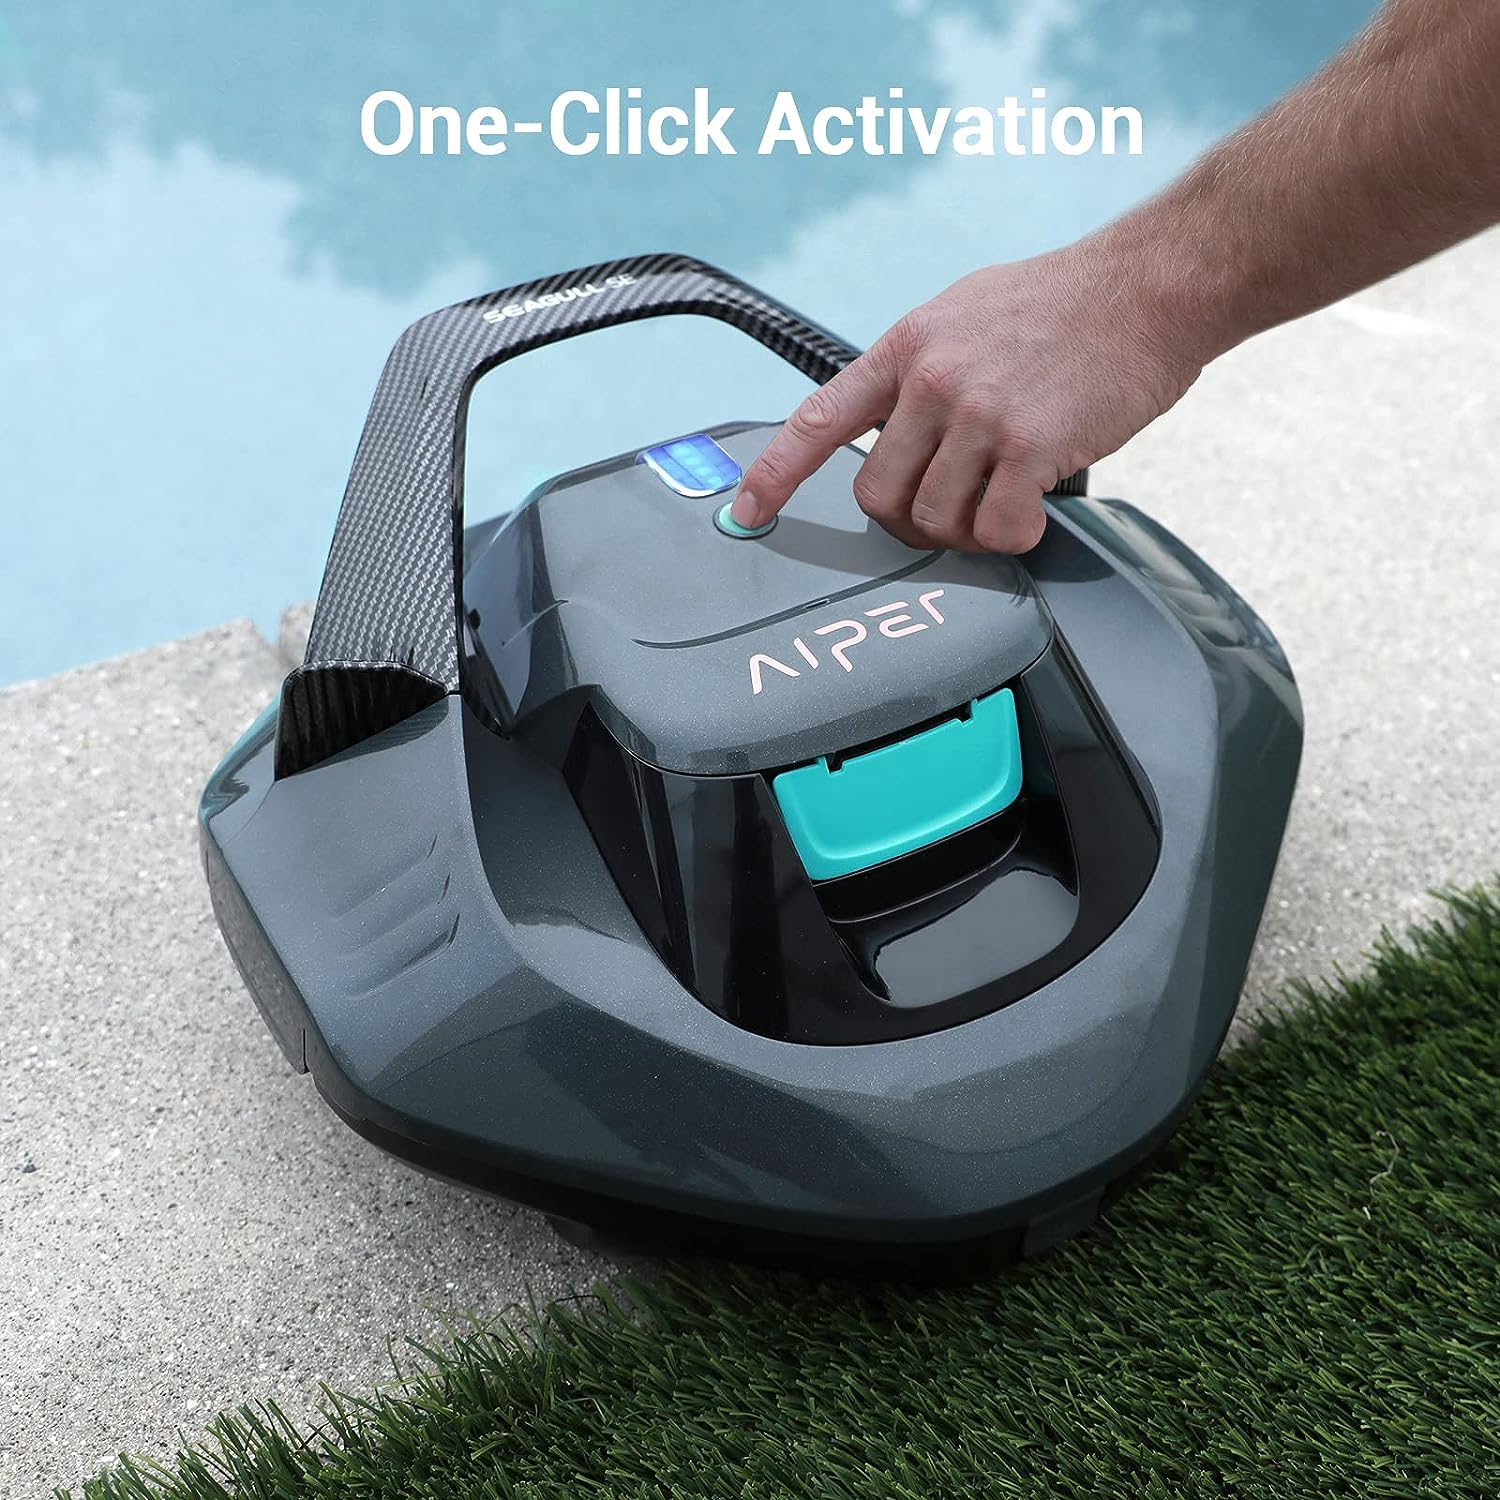 AIPER Seagull SE Cordless Robotic Pool Cleaner Review